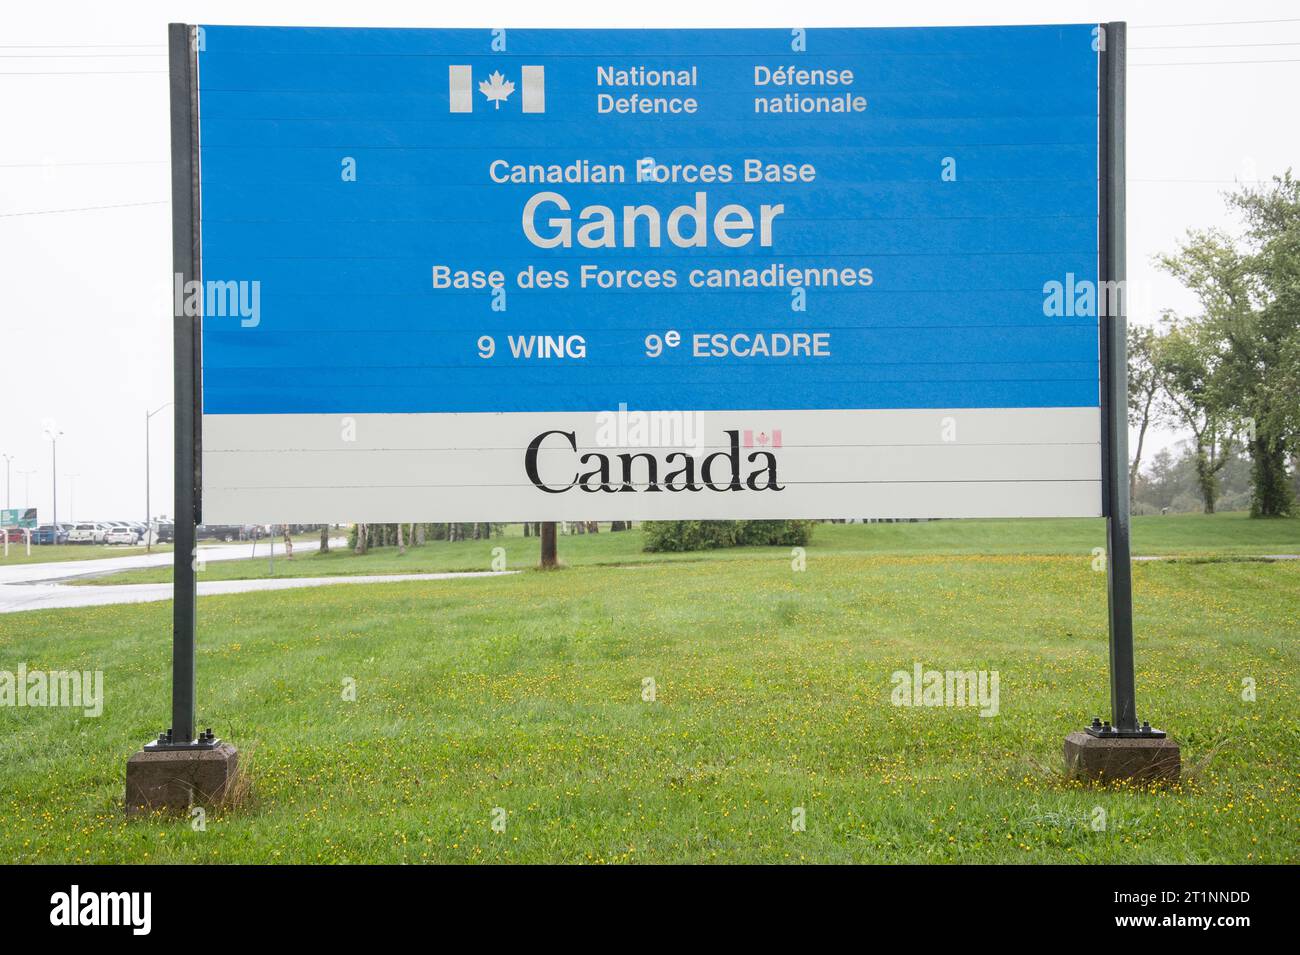 National Defence Canadian Forces Base sign at the airport in Gander, Newfoundland & Labrador, Canada Stock Photo